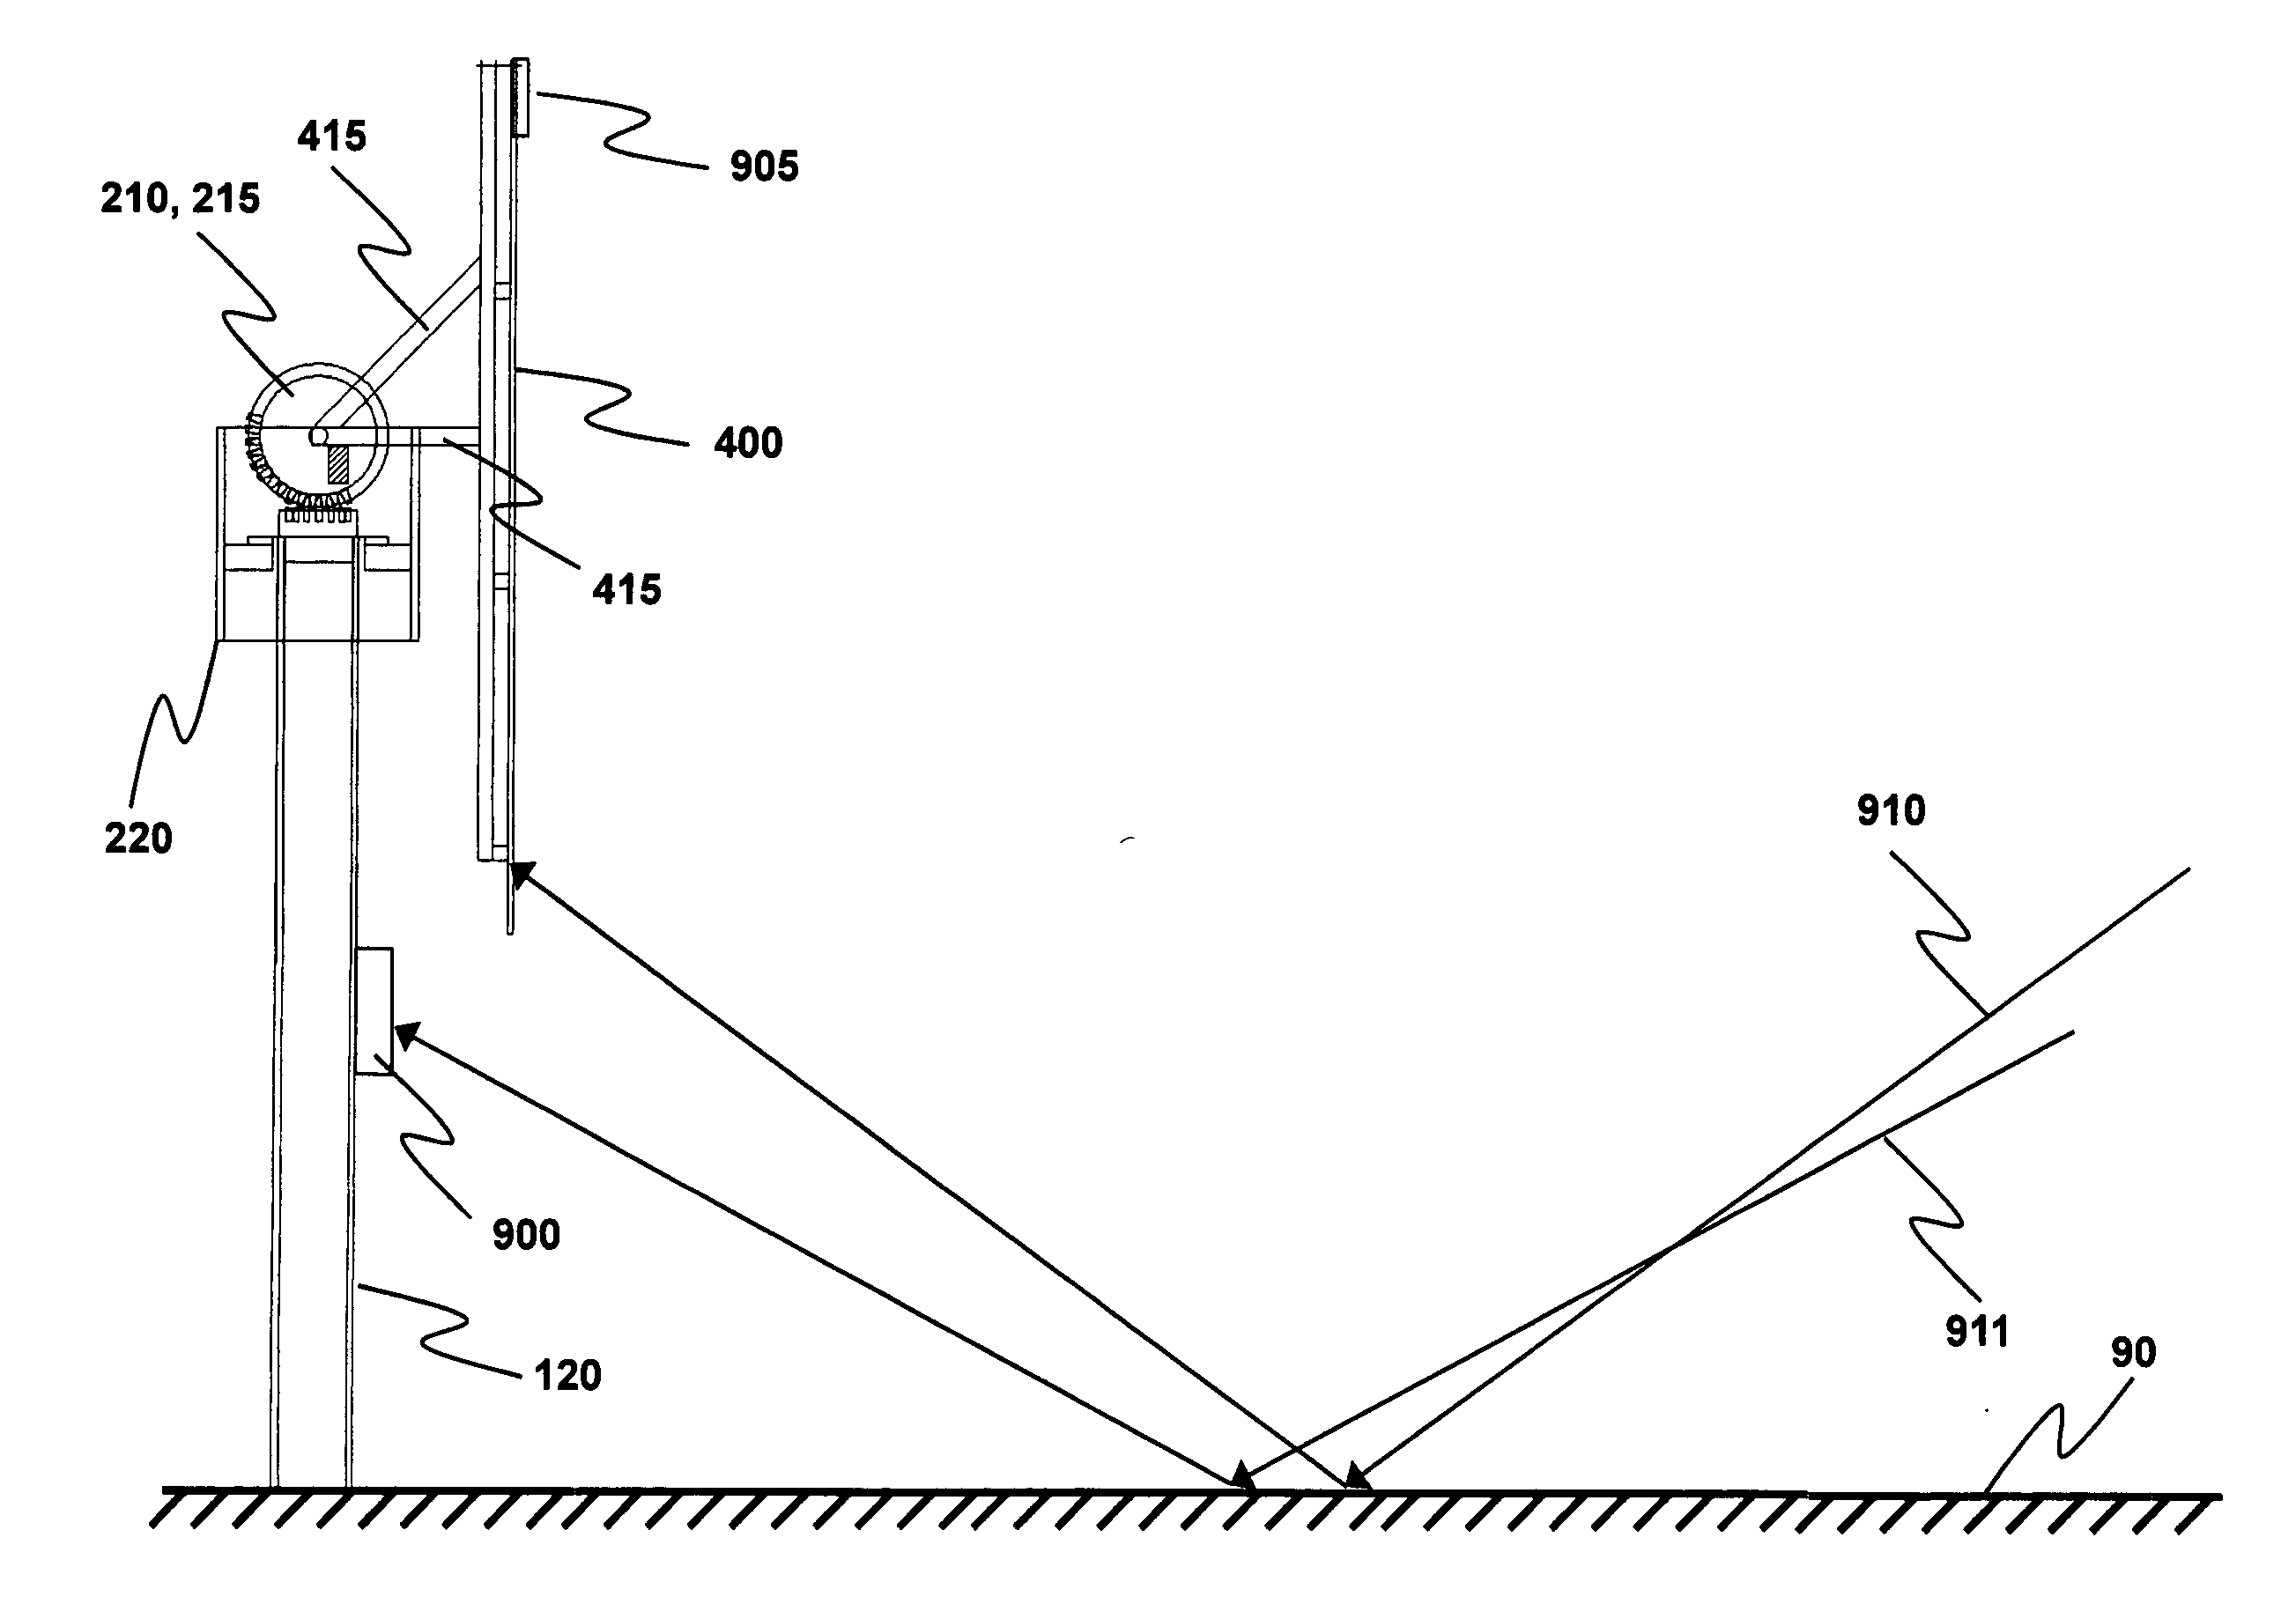 Solar photovoltaic support and tracking system with vertical adjustment capability